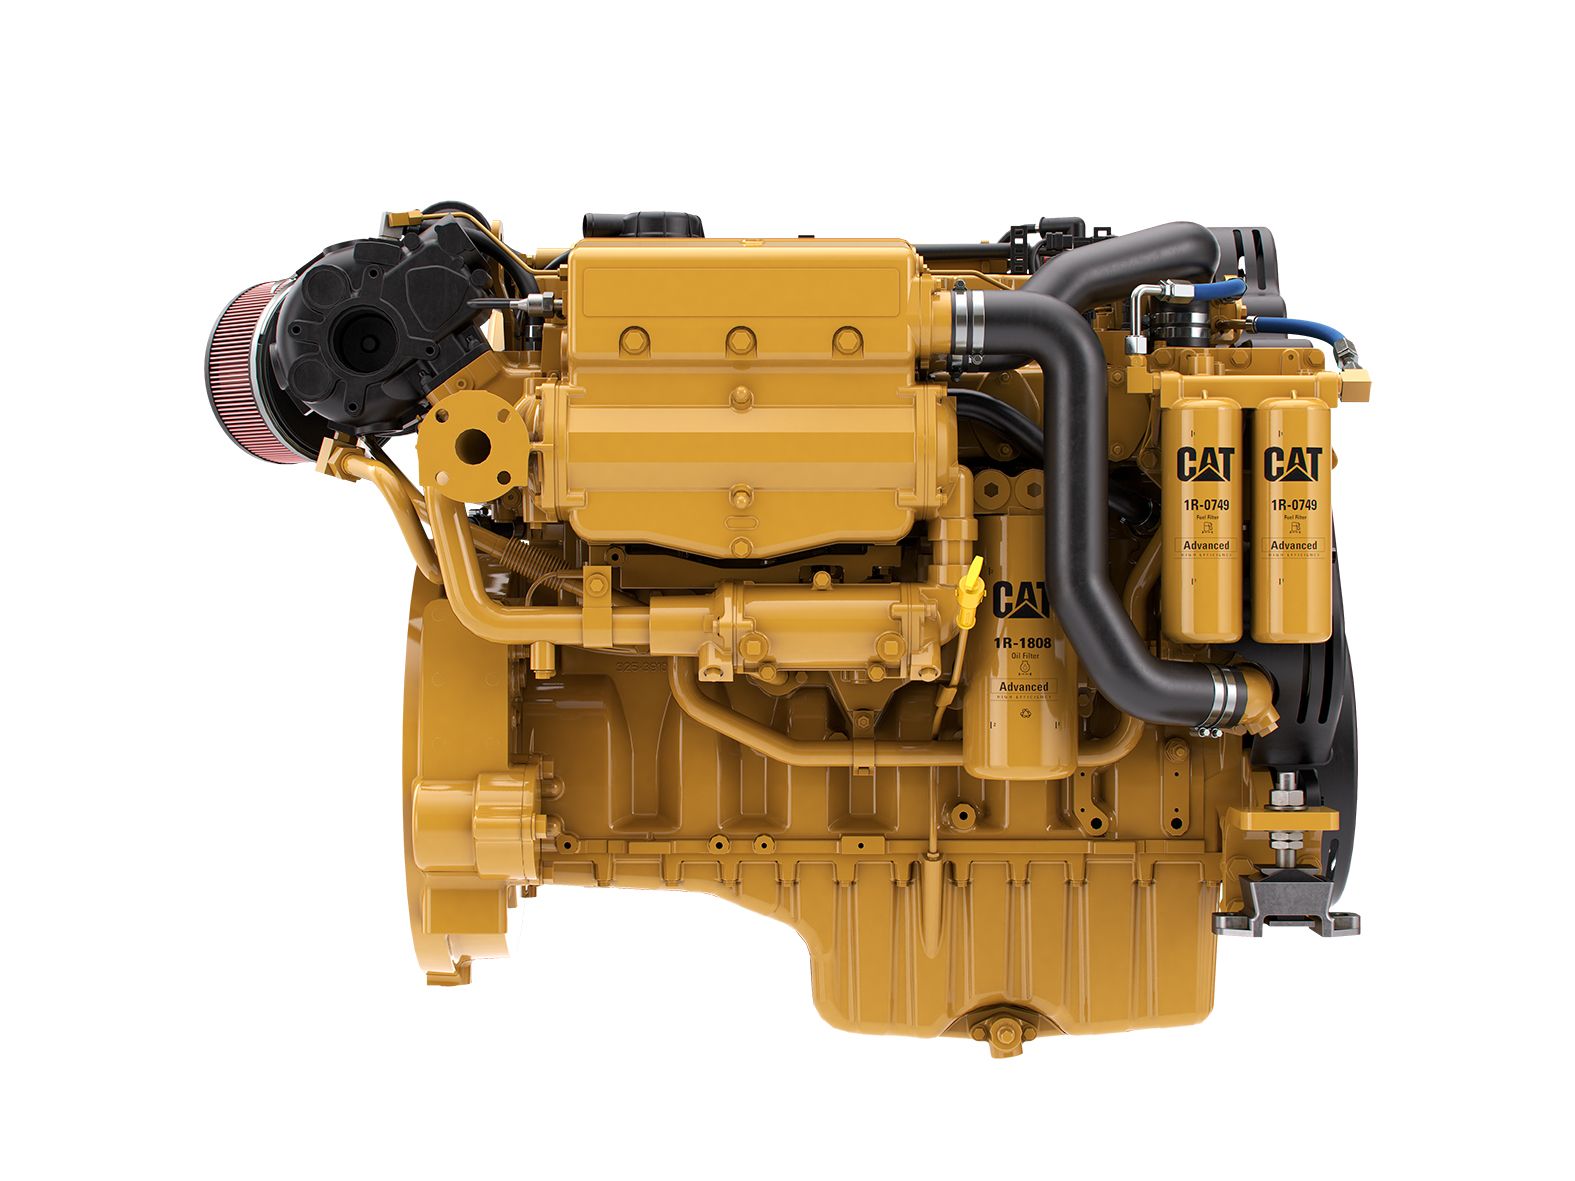 C9.3 Marine Propulsion Engine Commercial Applications